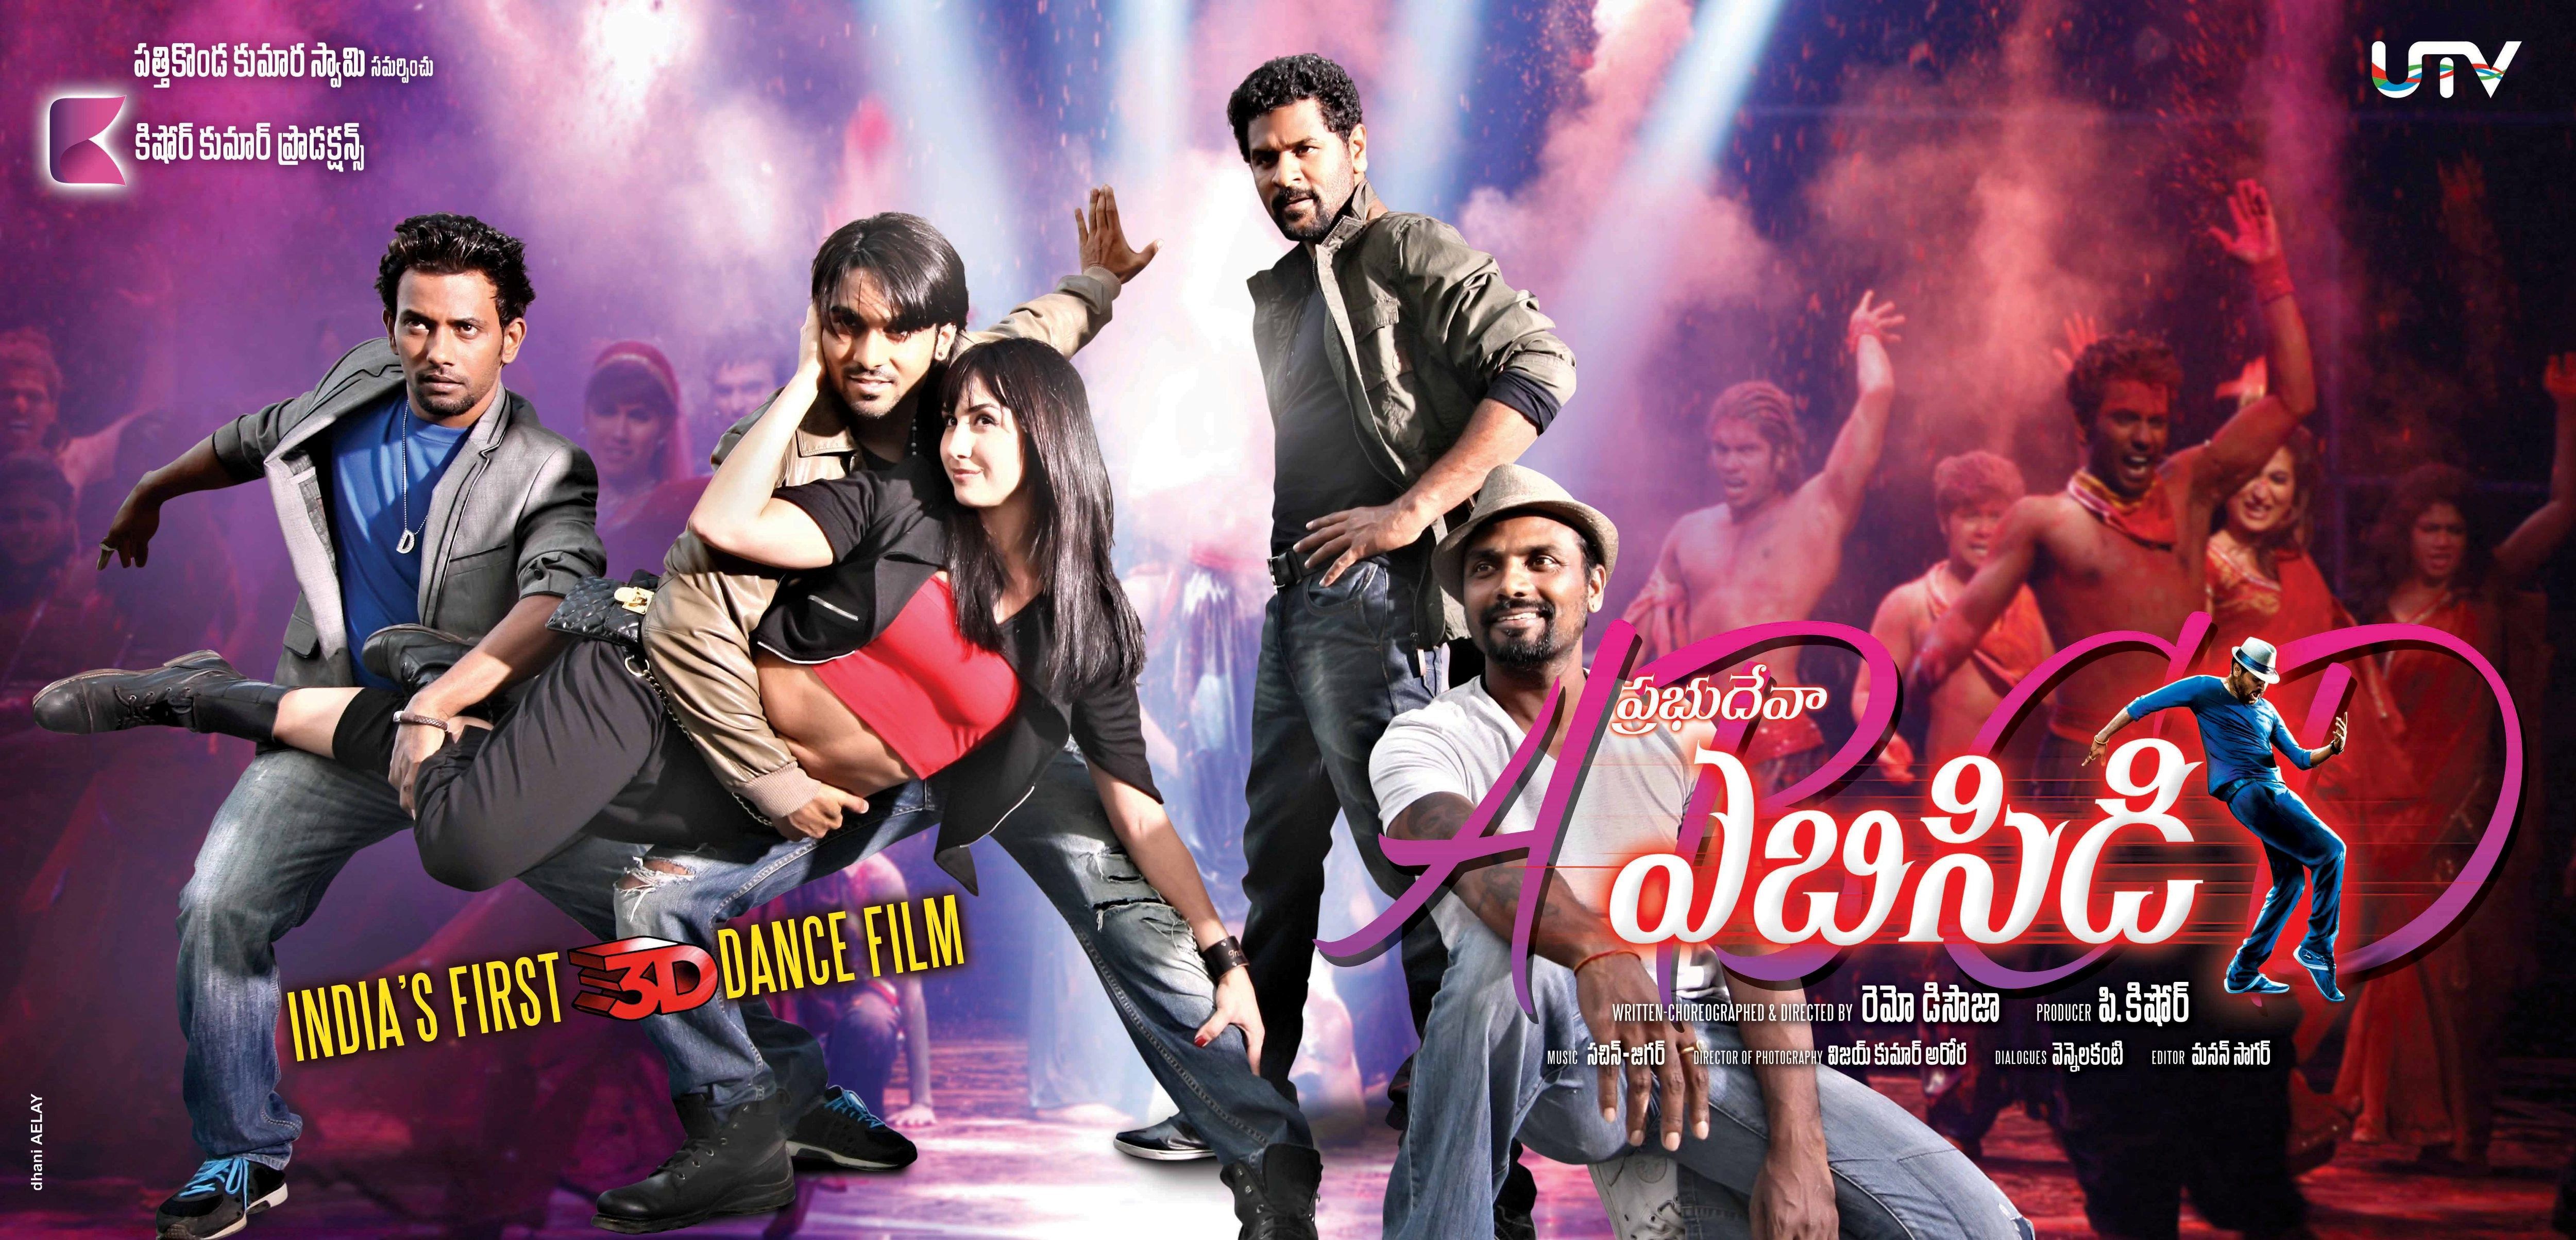 ABCD (Any Body Can Dance) Poster 1